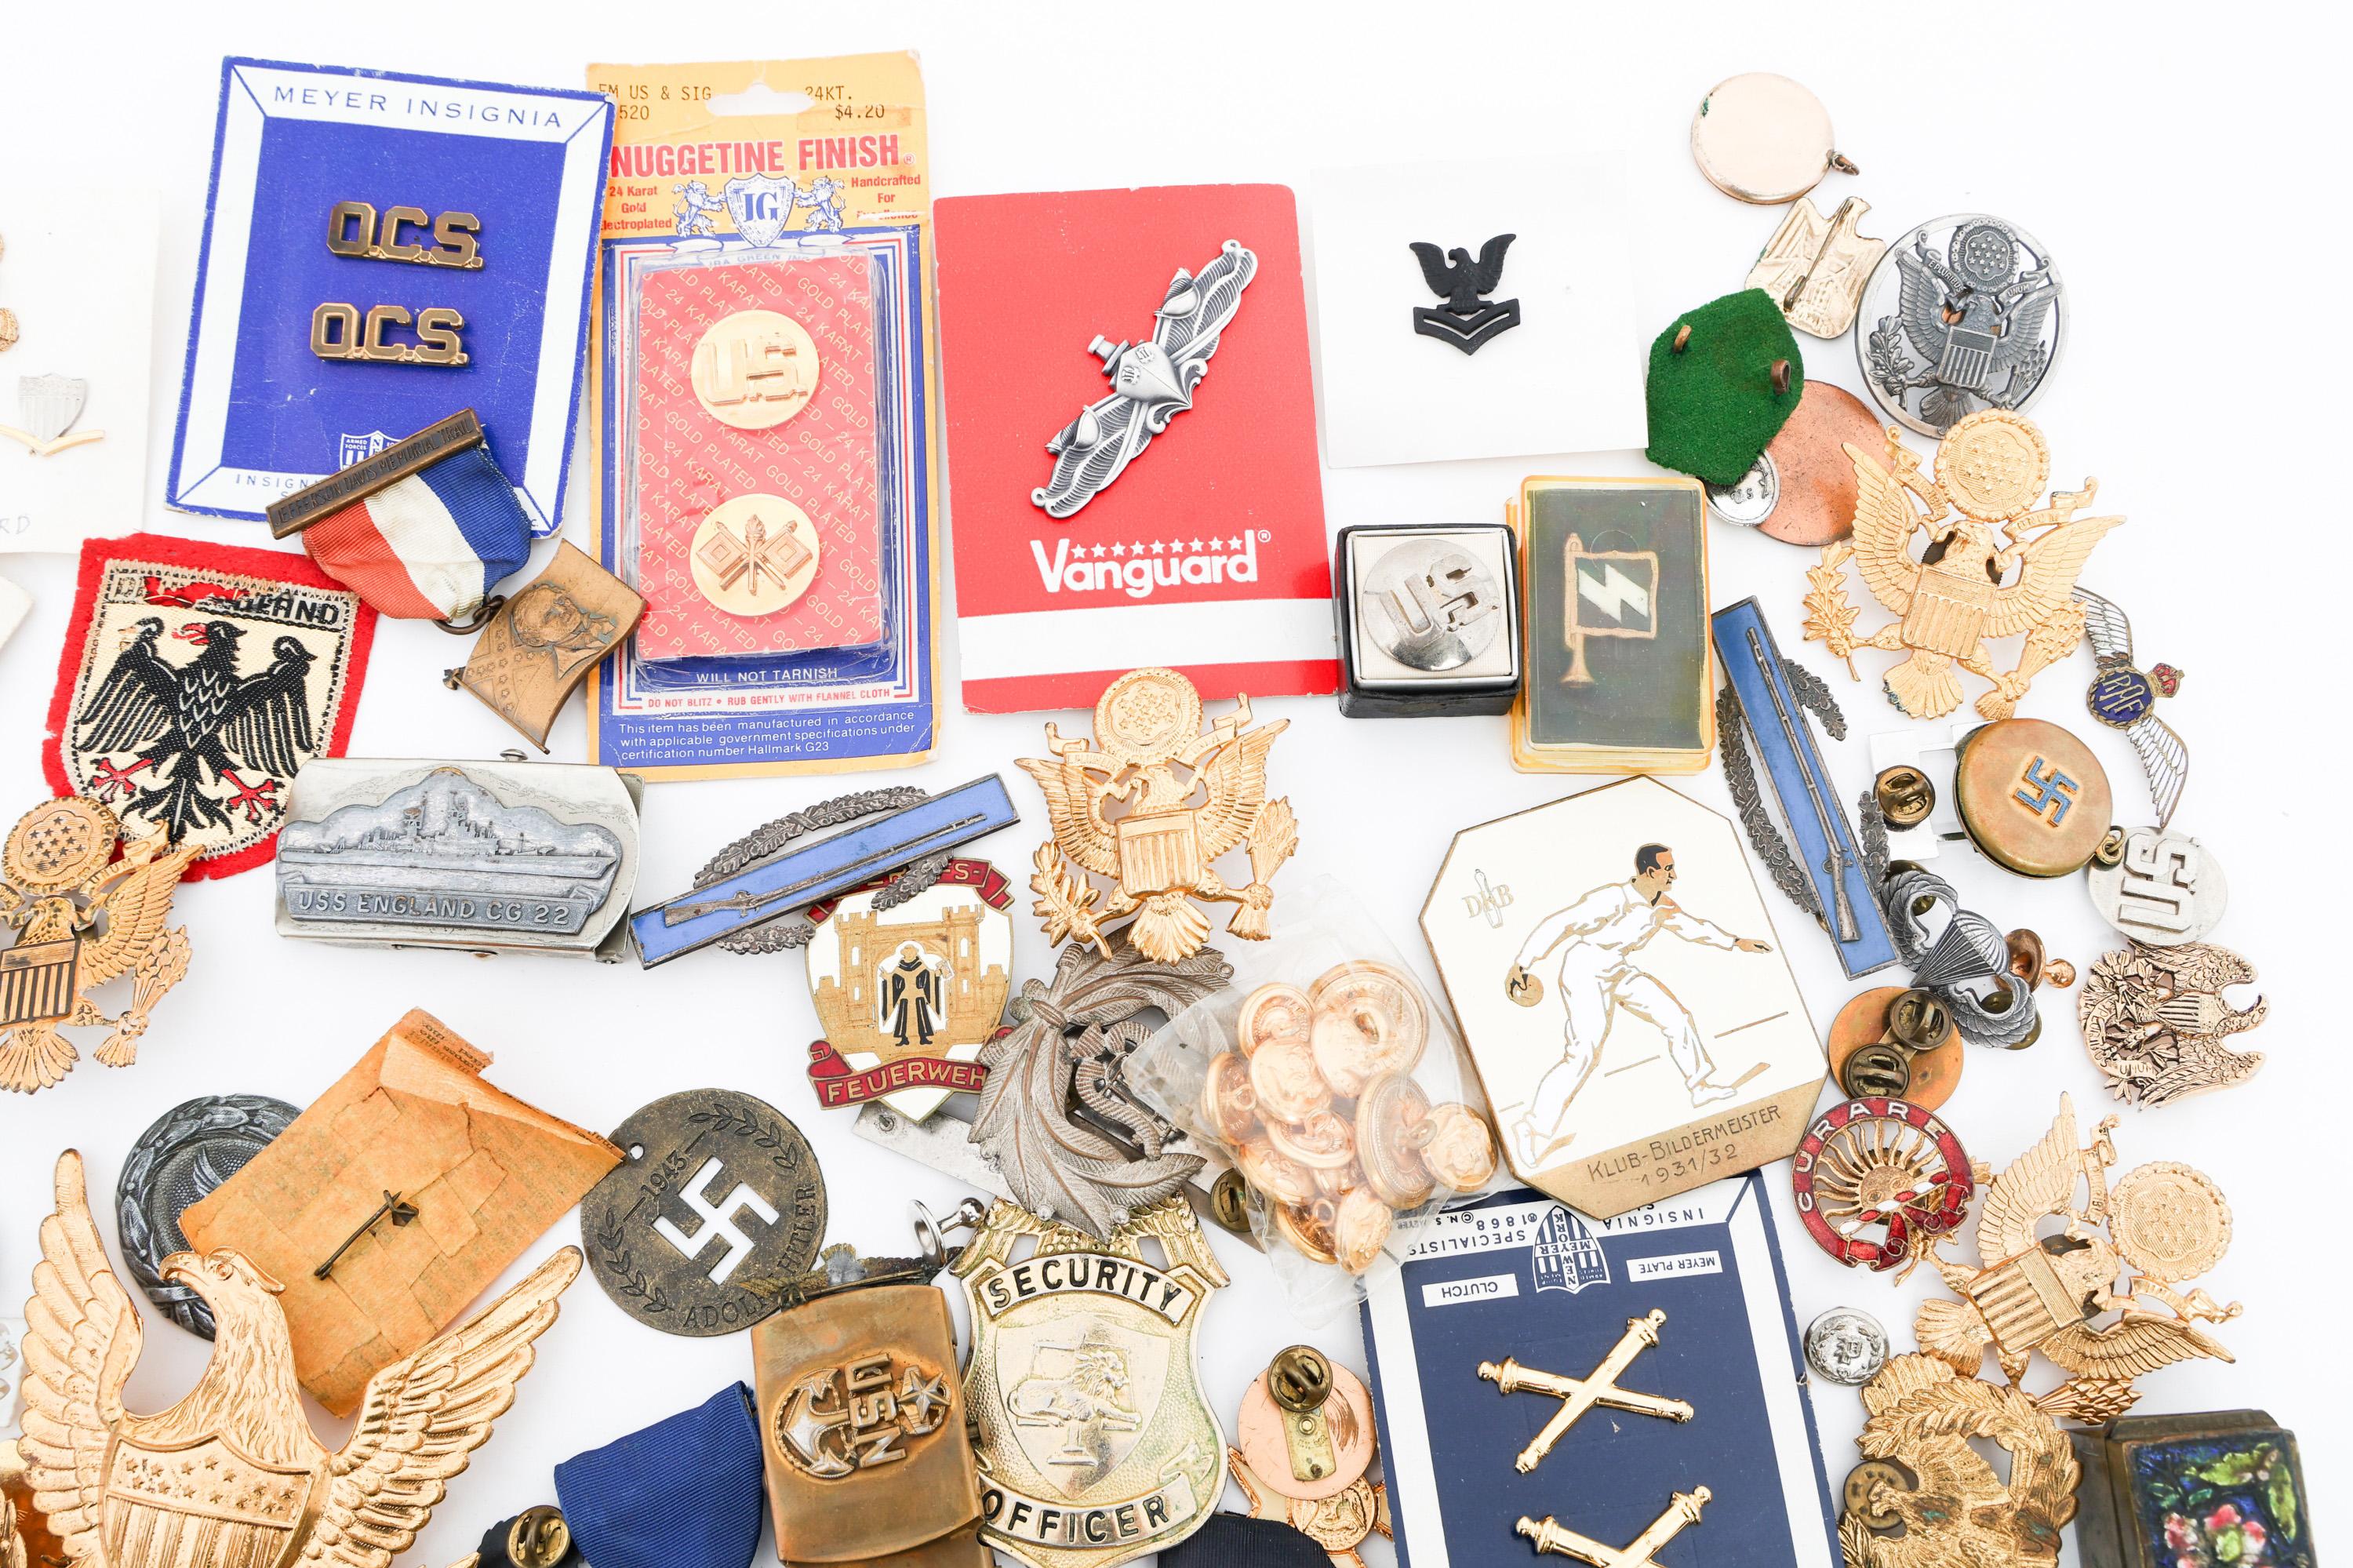 WWI - COLD WAR WORLD MILITARY BADGES & INSIGNIA